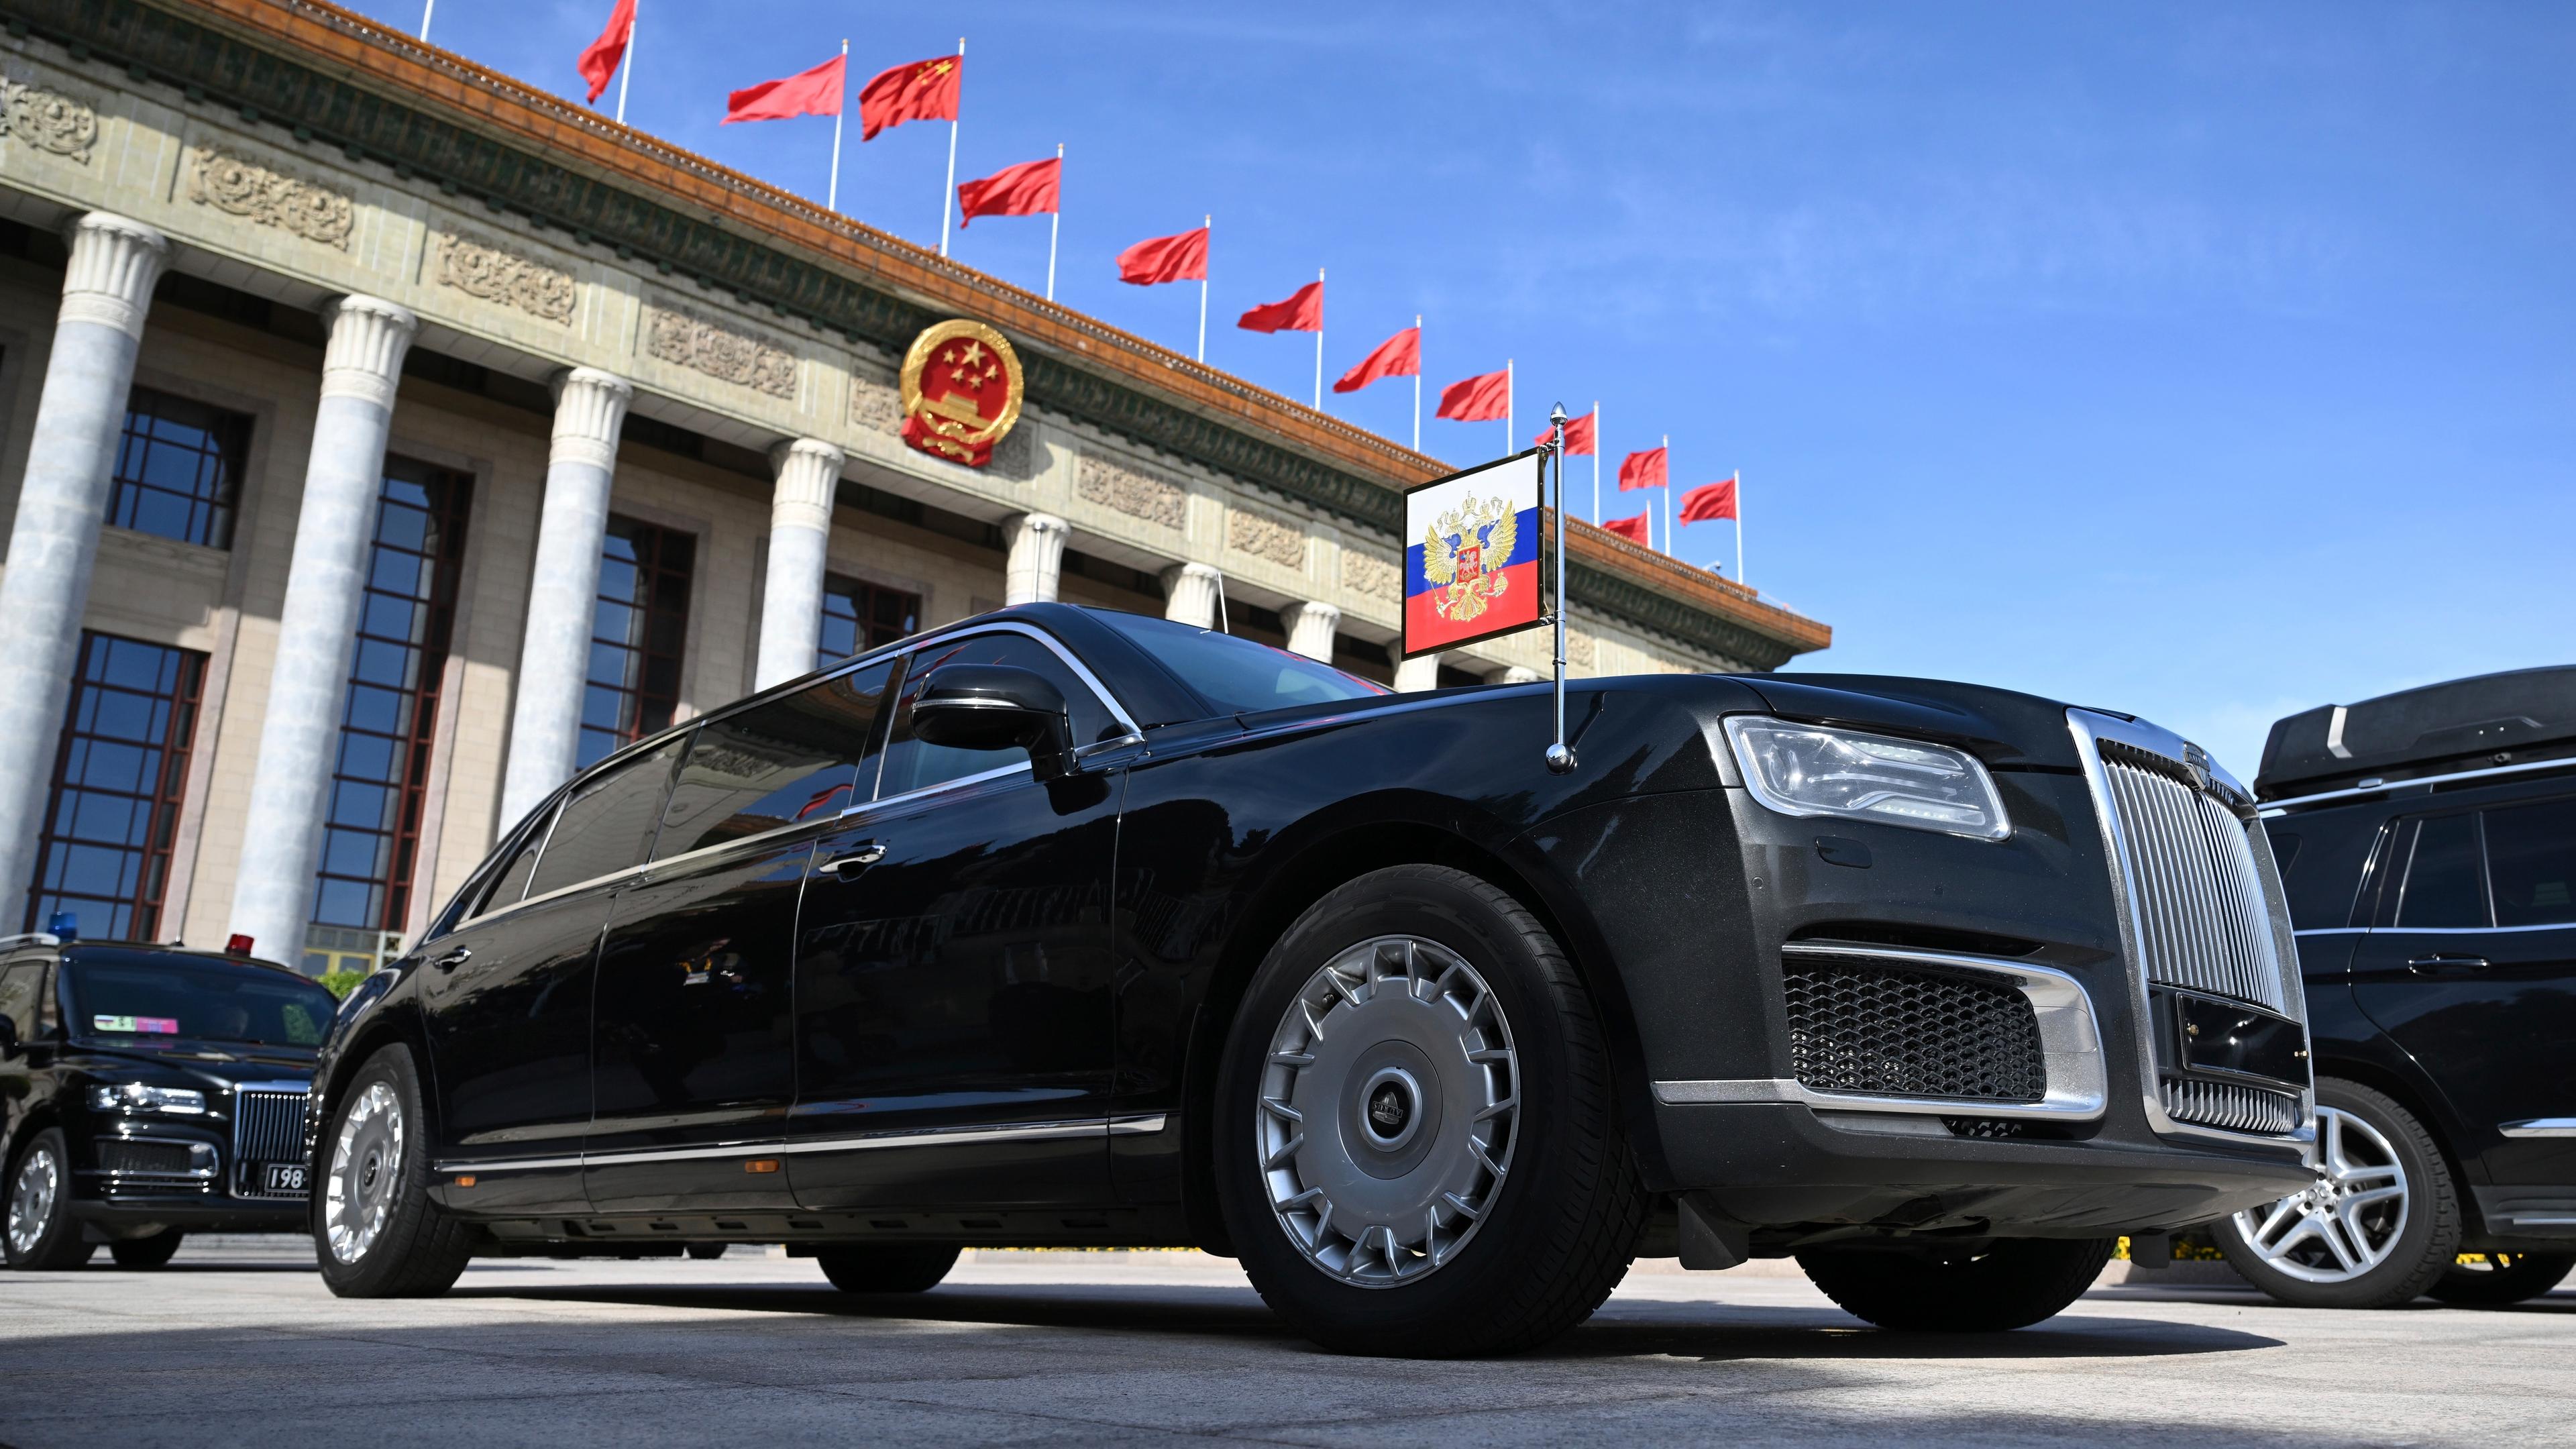 Russian President Vladimir Putin's Aurus Senat car parked at the Great Hall of the People, Chinese parliament building during the Belt and Road Forum in Beijing, China, on Wednesday, Oct. 18, 2023.